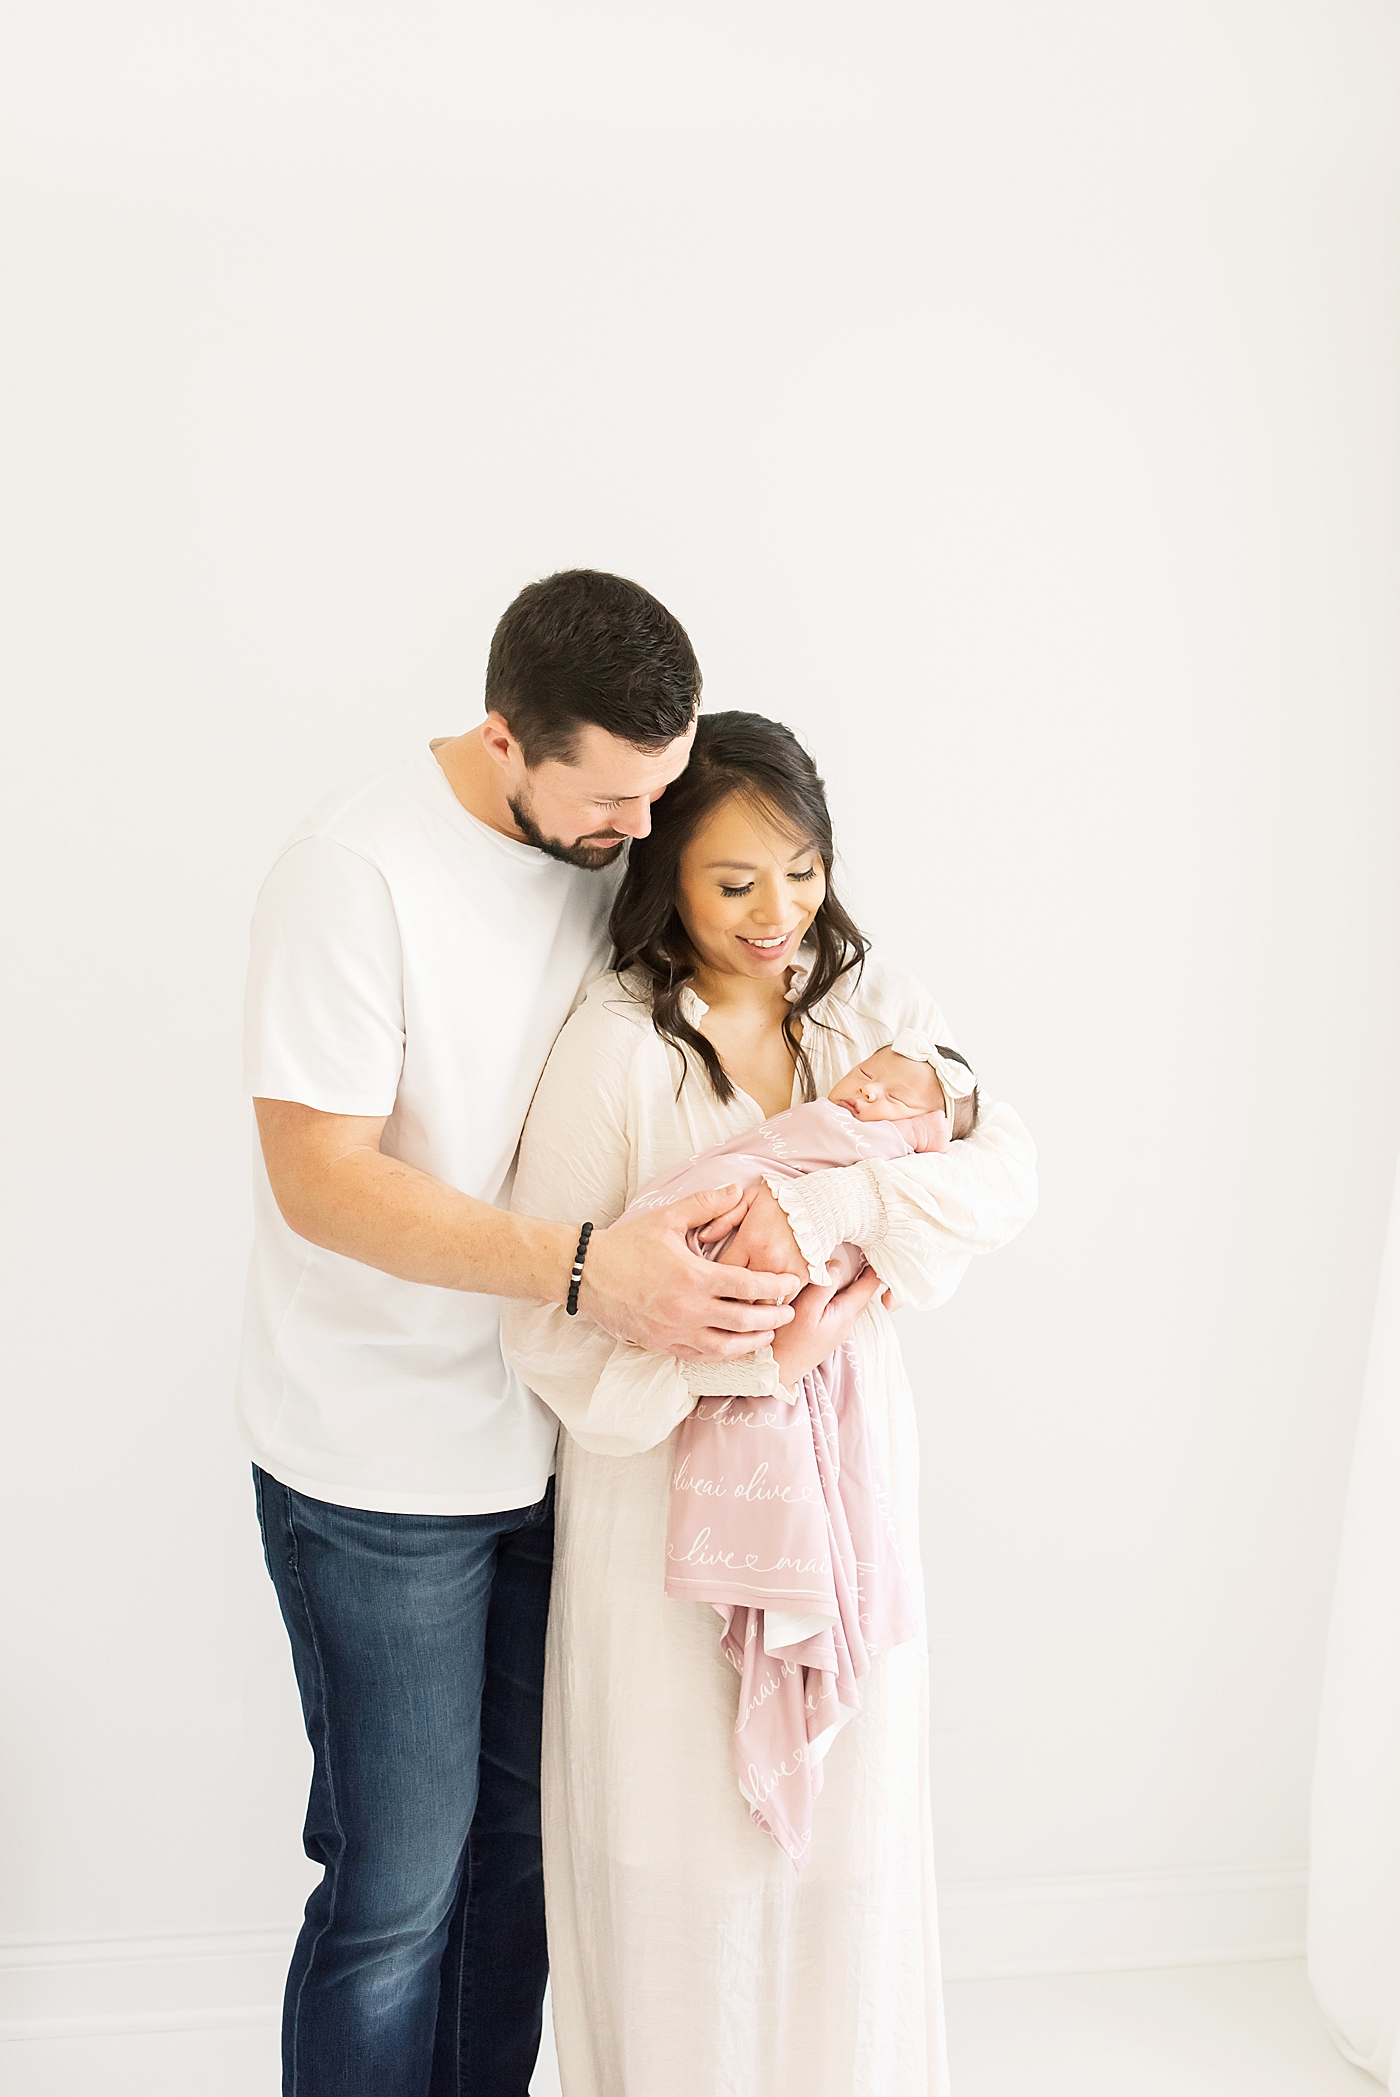 Newborn studio session for mom and dad and their new baby girl | Photo by Anna Wisjo Photography